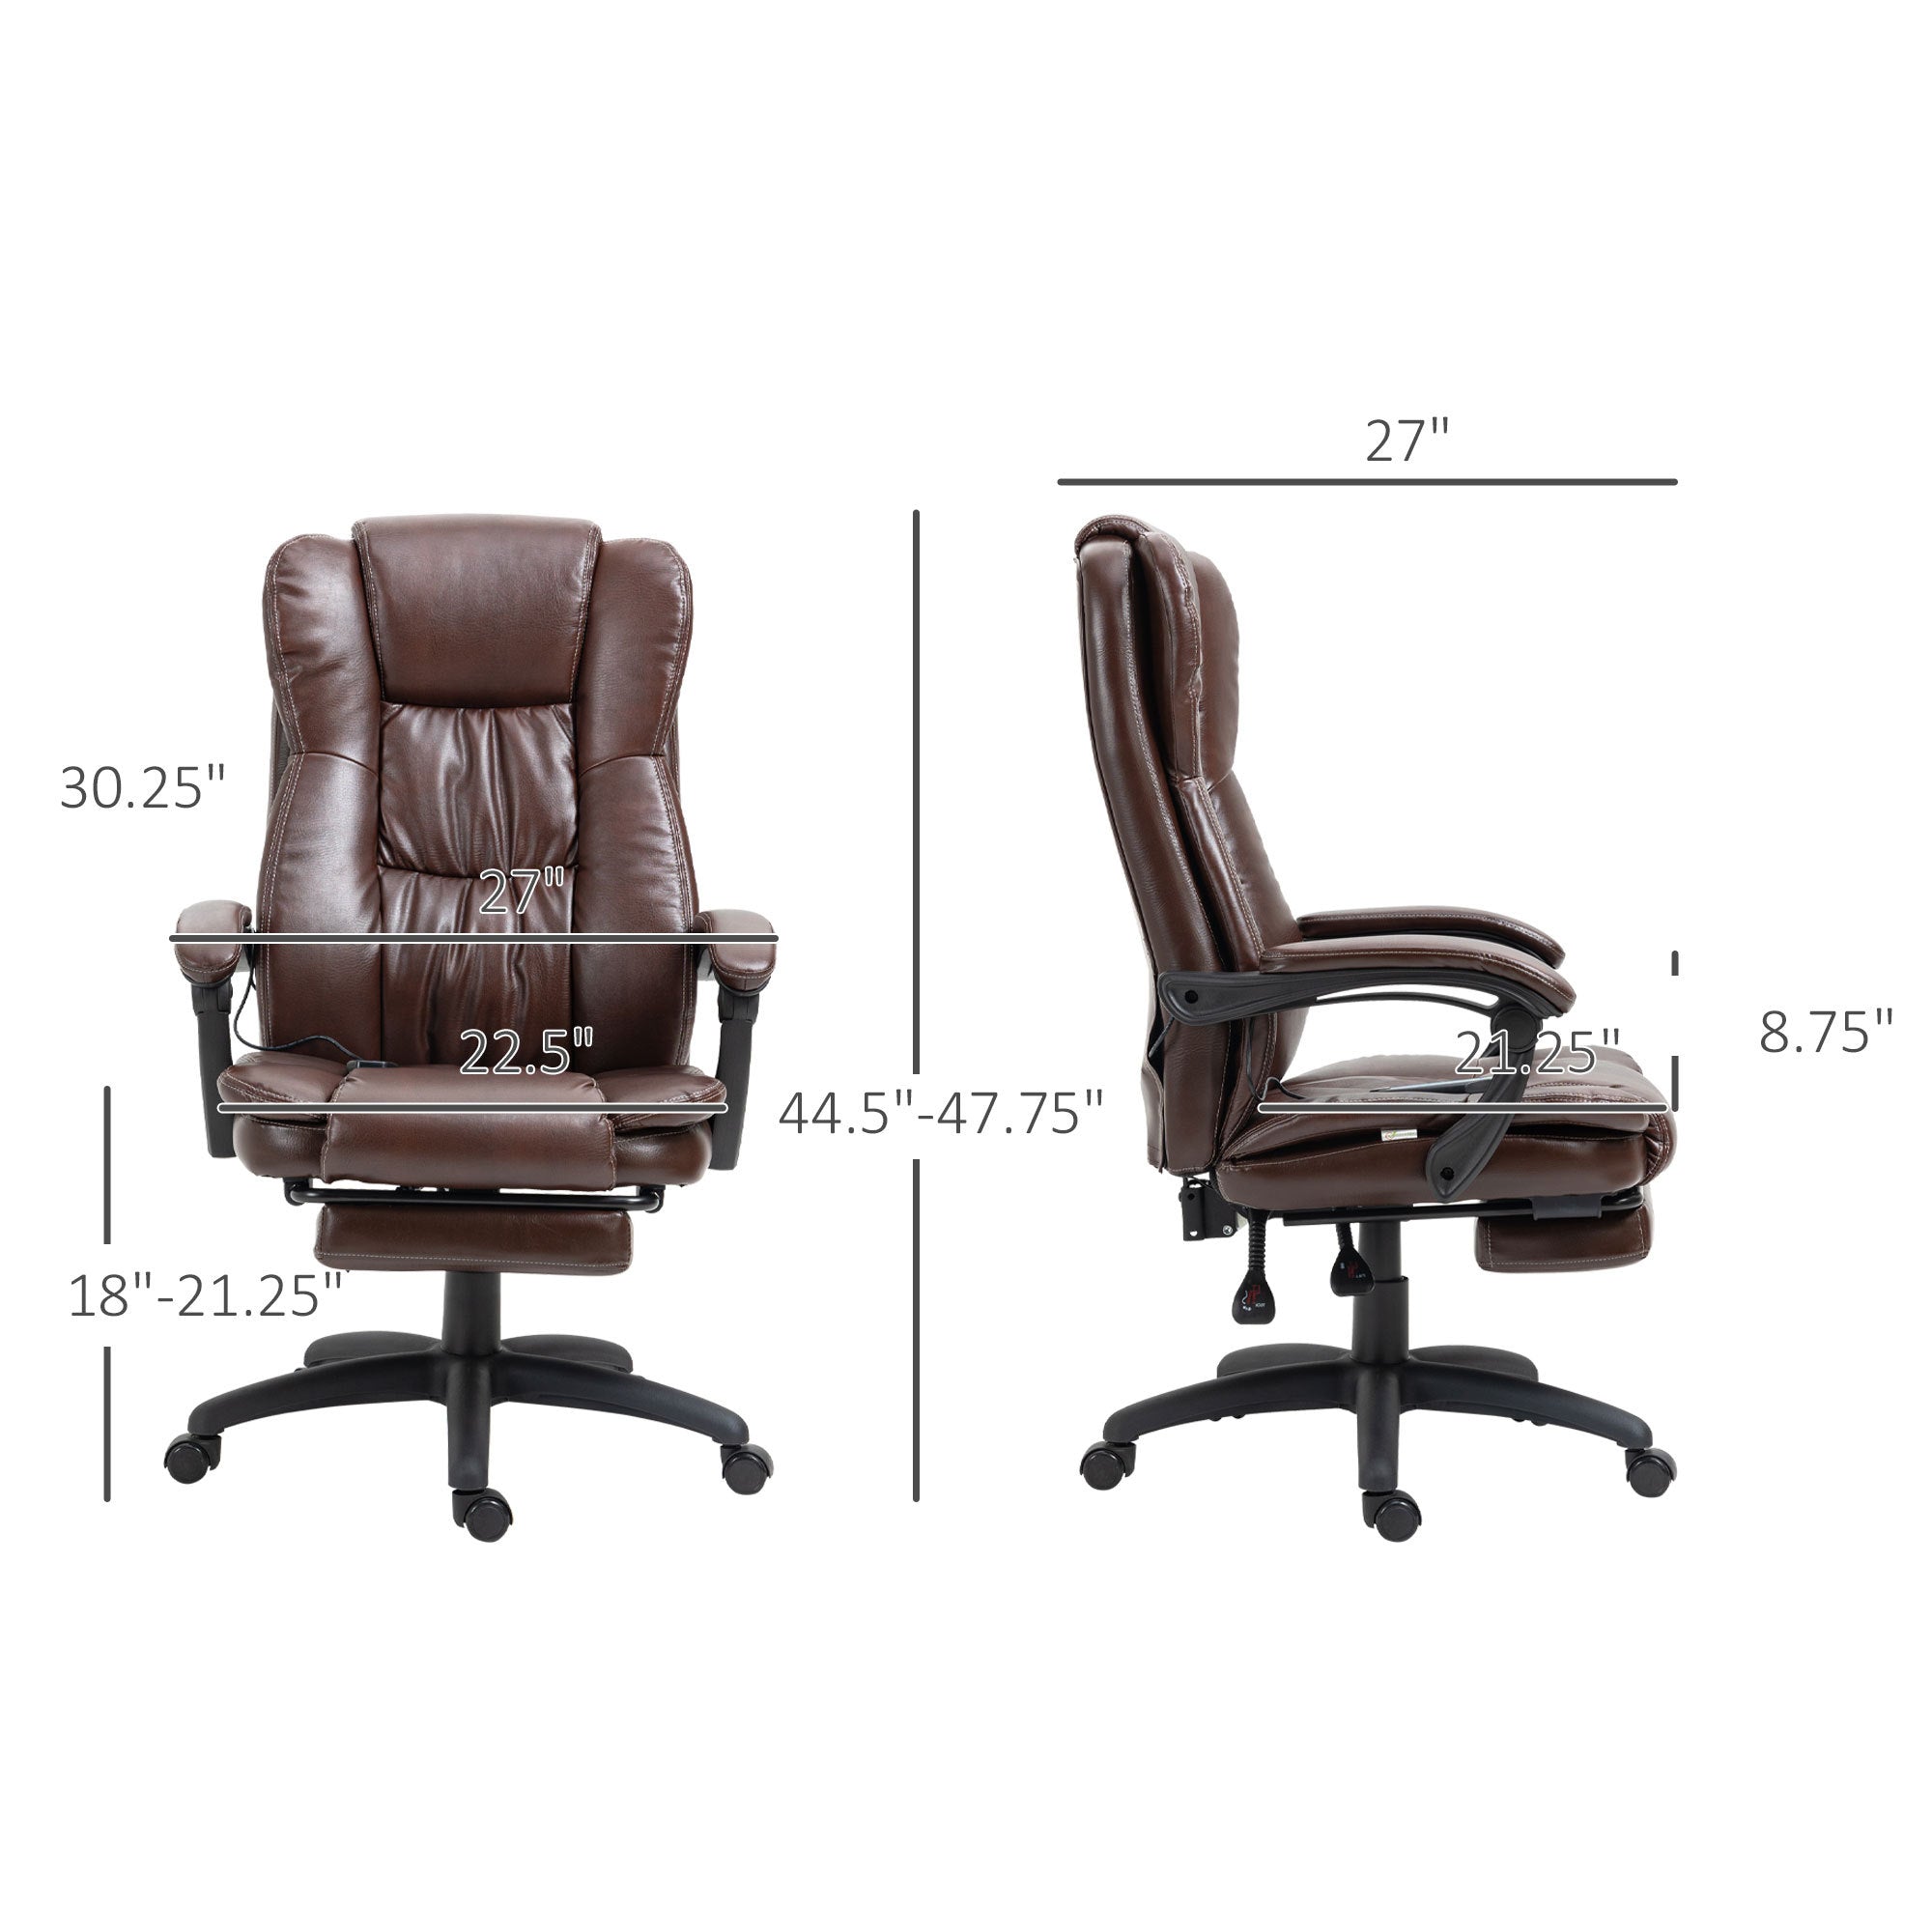 High Back Massage Office Chair with 6 Point